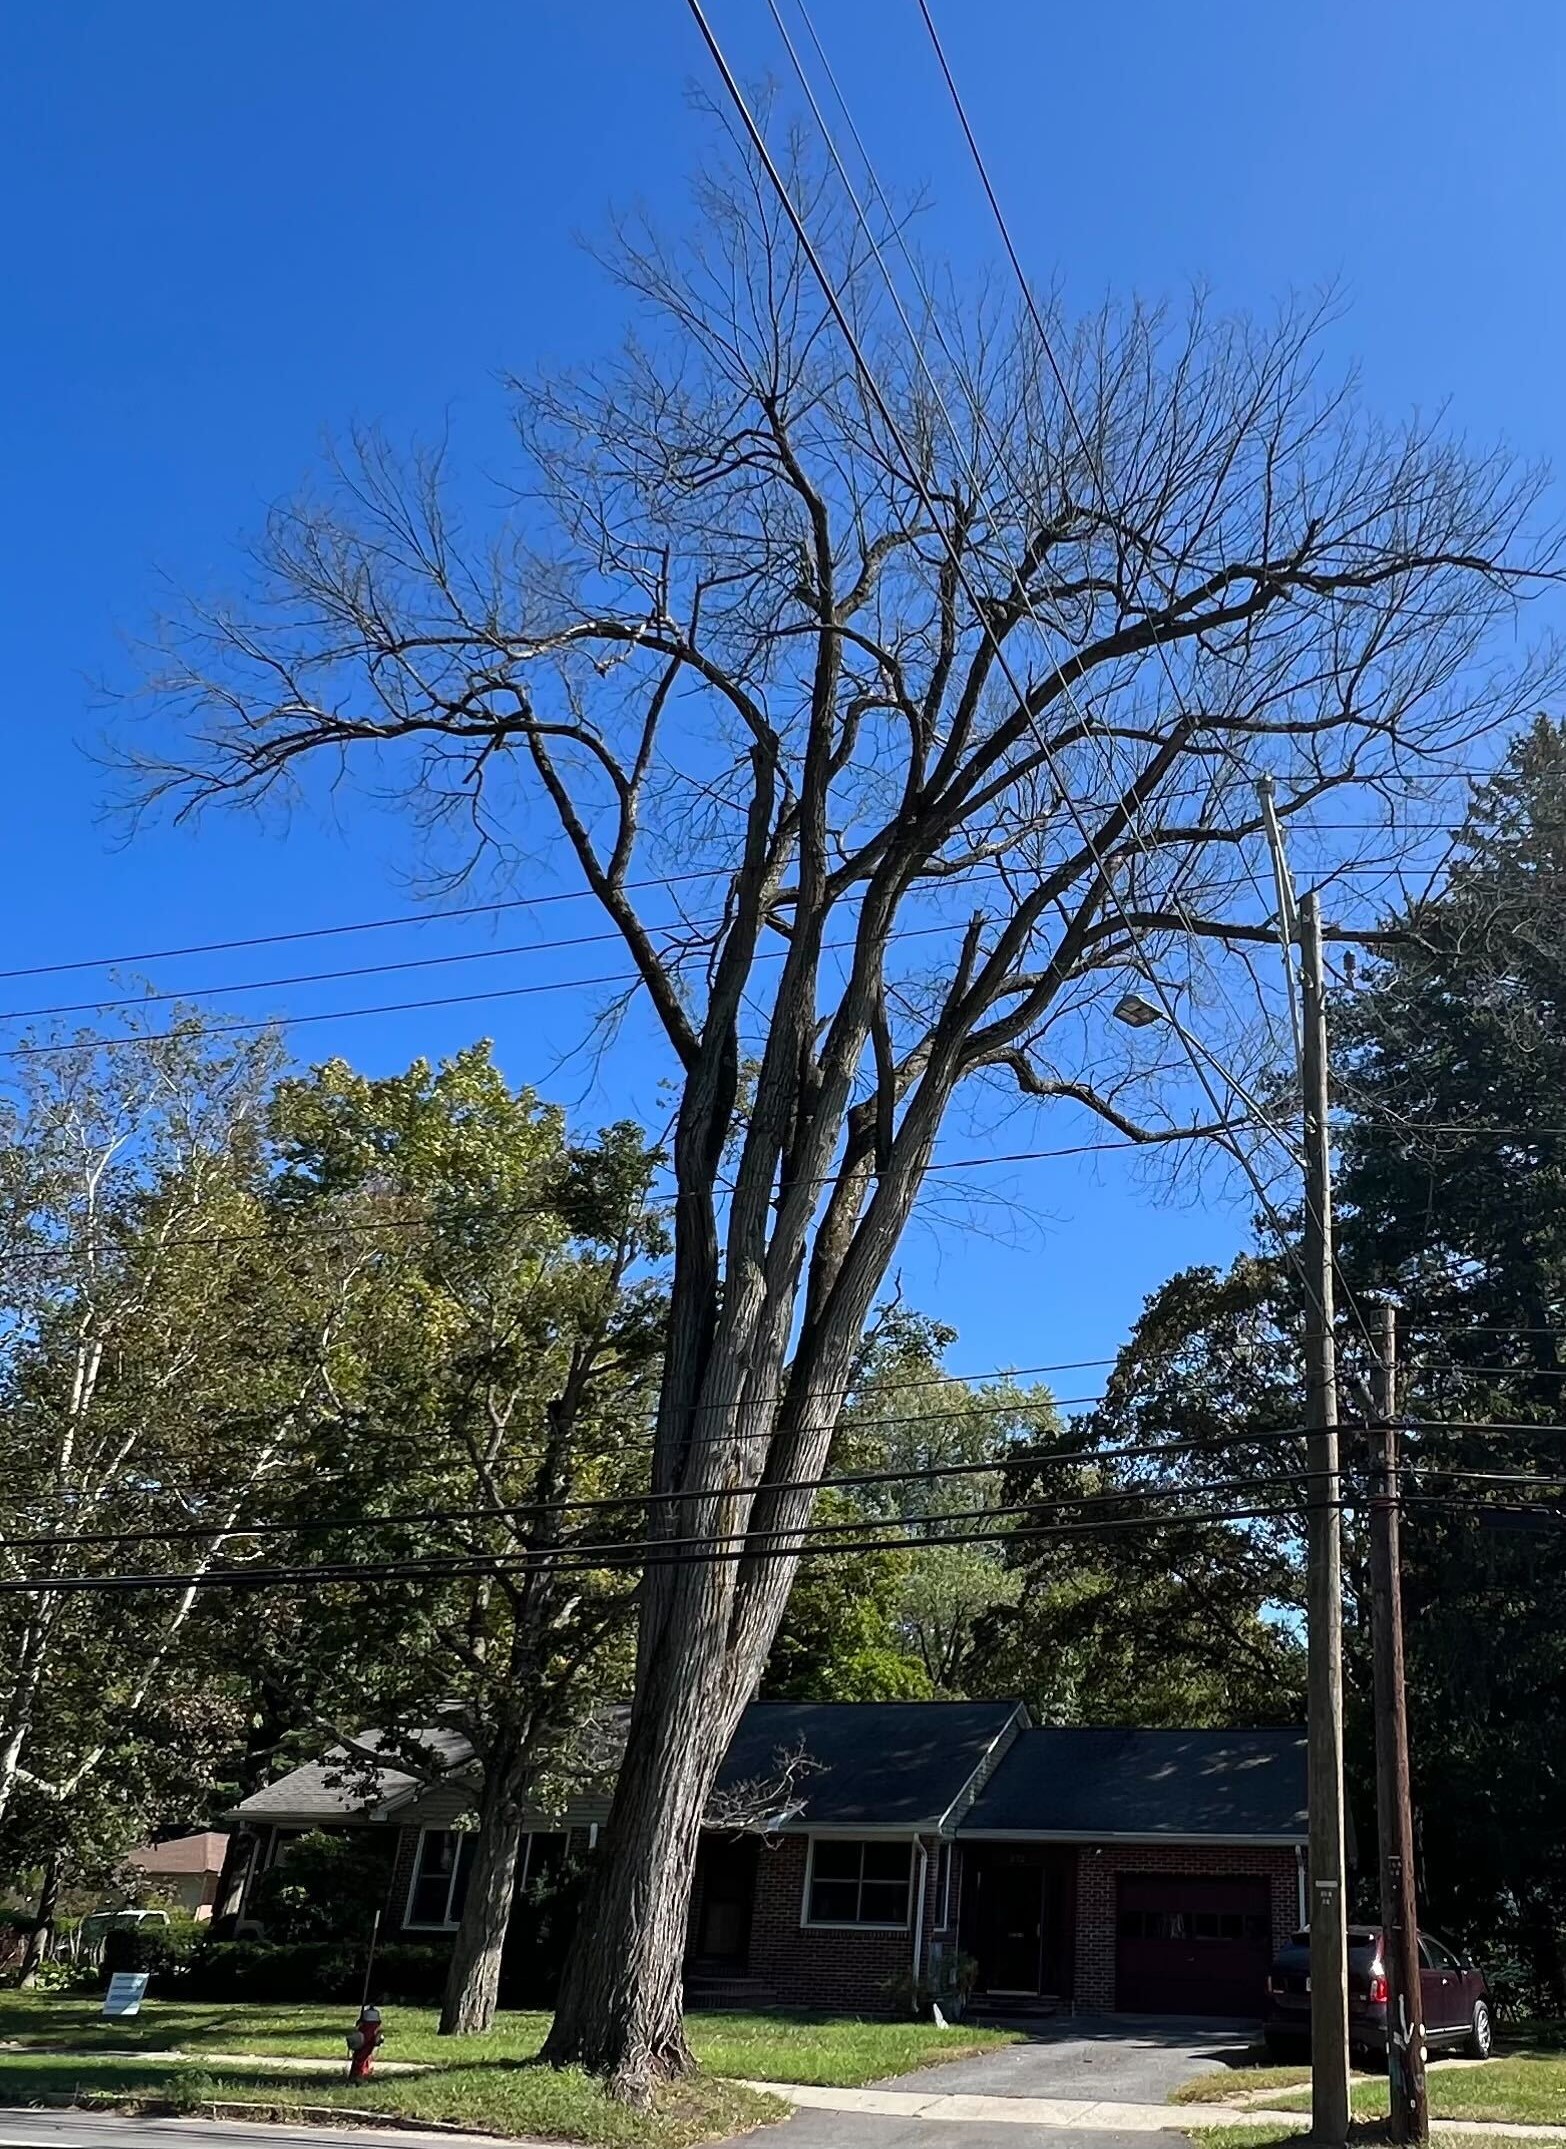 A dead elm tree threatens power lines and public safety in Easthampton.